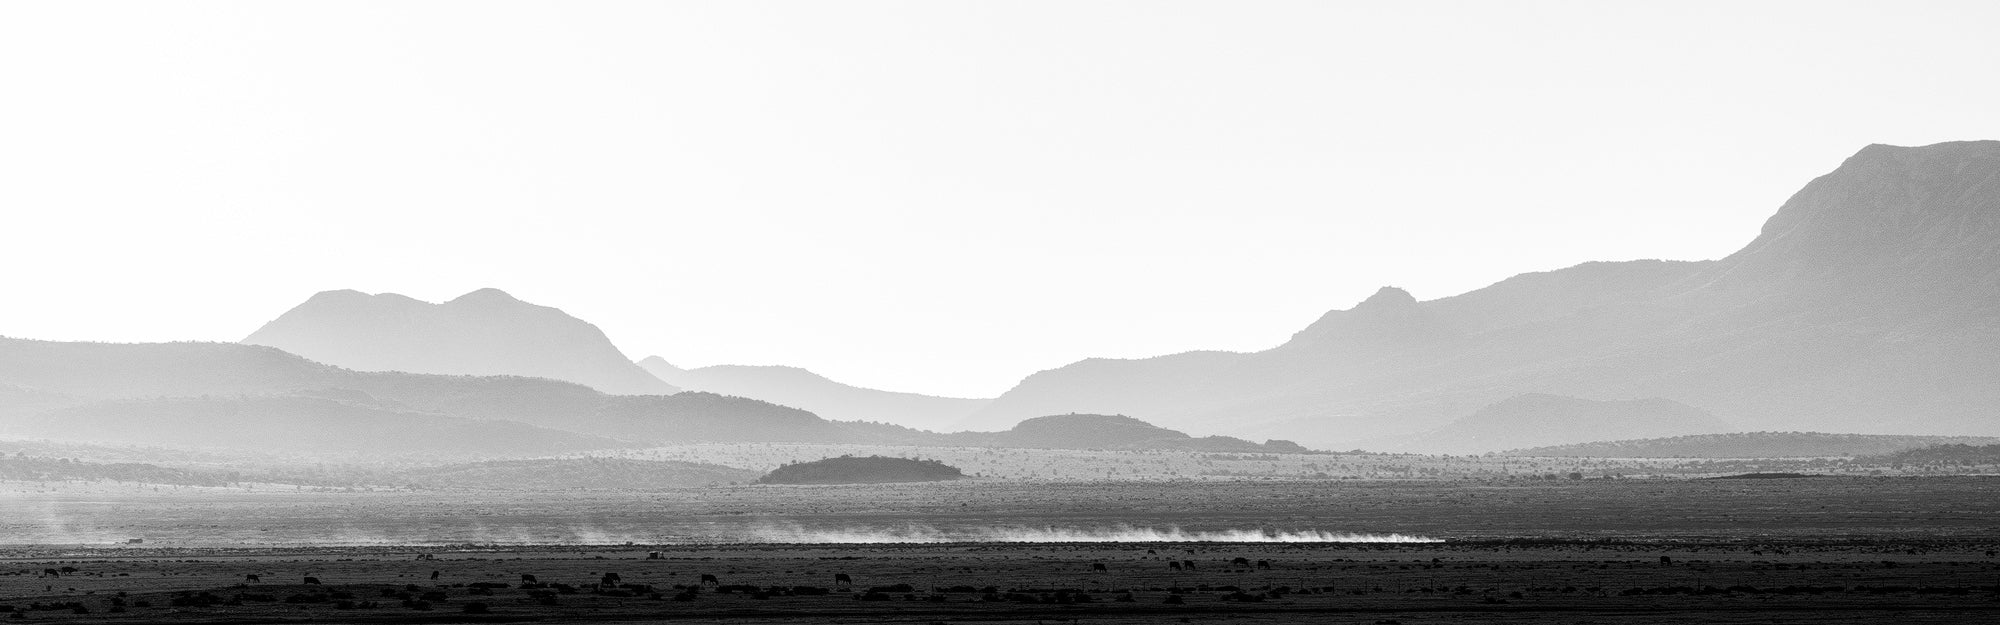 Desert Crossing: Black and White Panoramic Landscape Photograph by Keith Dotson. Buy a fine art print here.